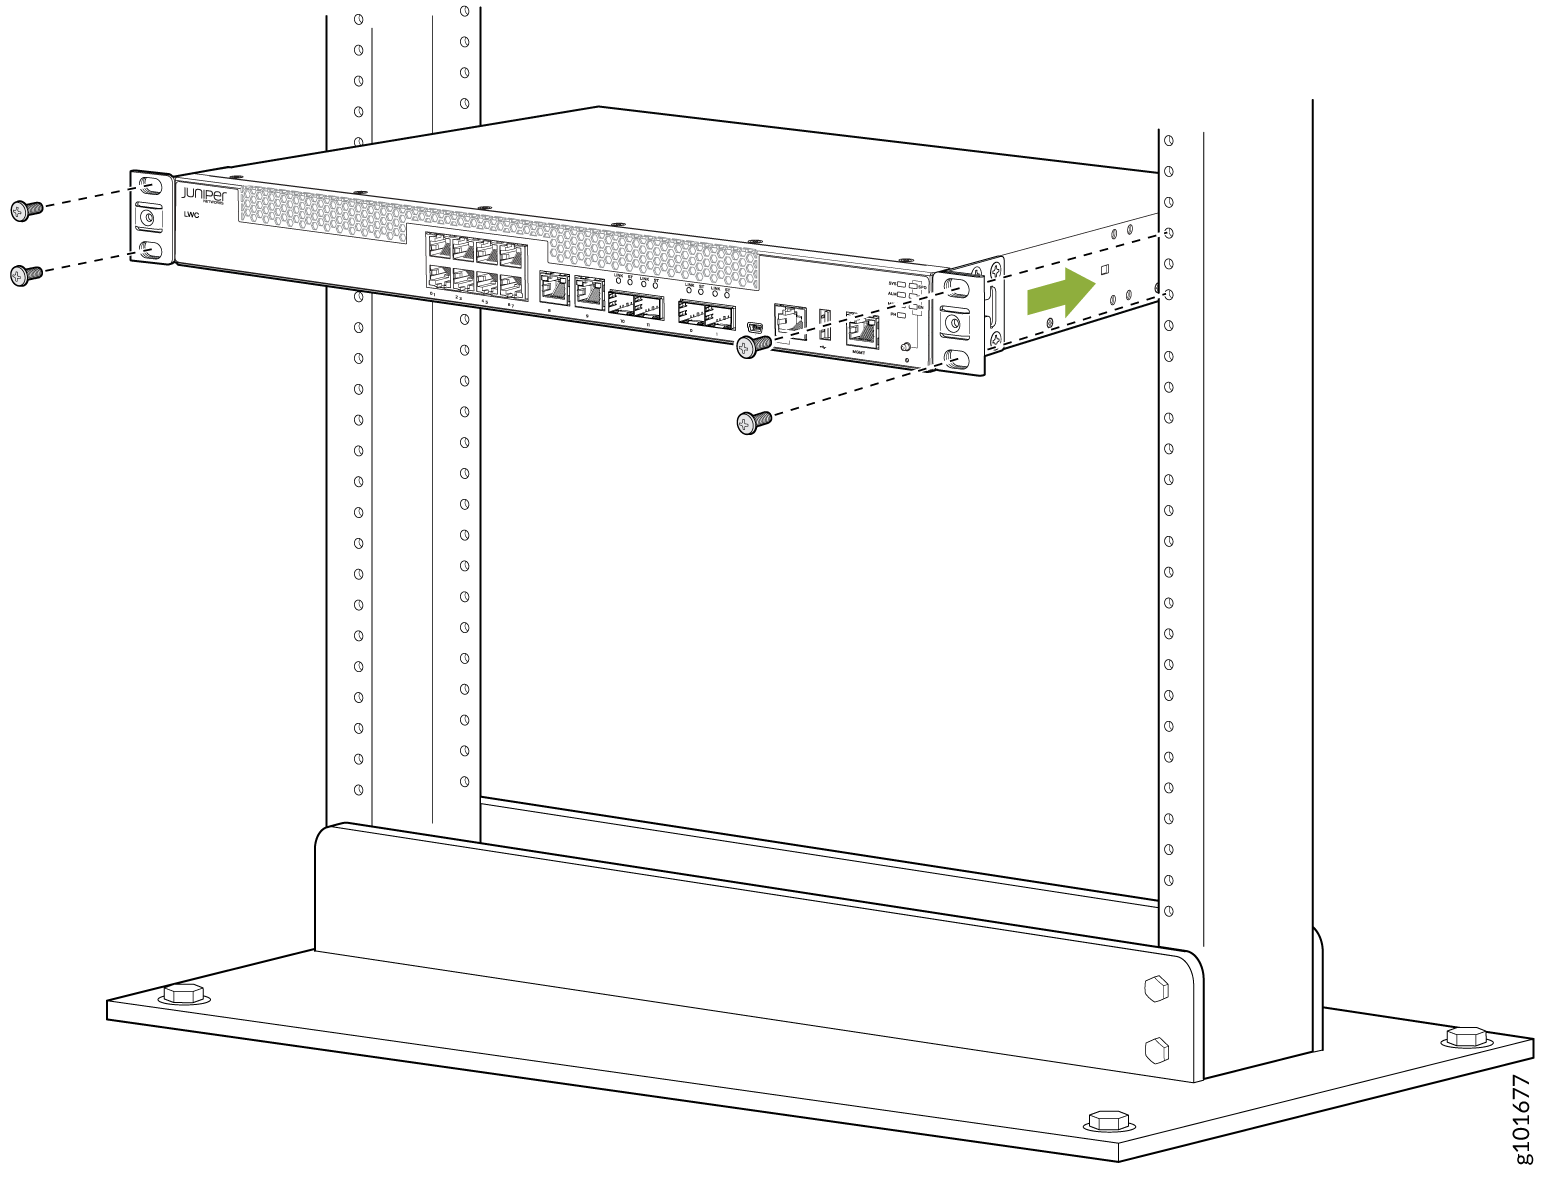 Mount the Device on Two Posts in a Rack